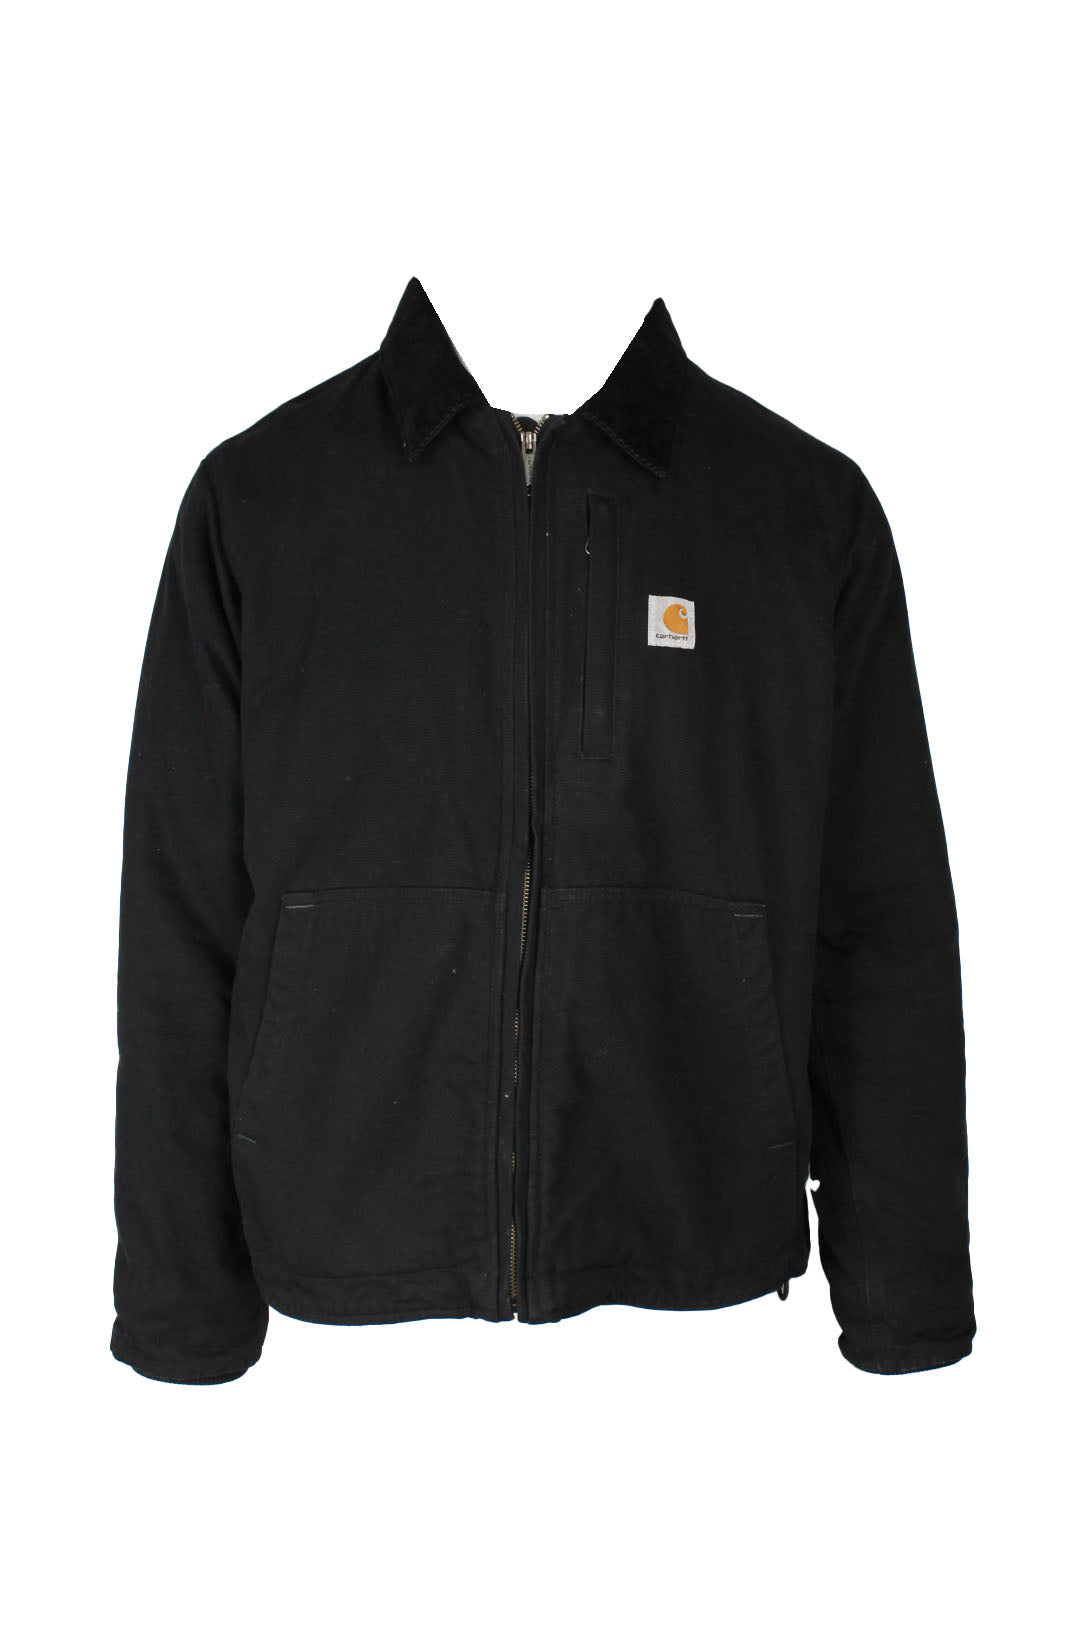 front view of carhartt black zip up ‘full swing’ canvas fleece lined jacket. features ‘carhartt’ logo tag at left breast zip pocket, front kangaroo pouch pockets, inner zip/velcro chest pockets, drawstring at hem, ribbing at cuffs, and corduroy collar.